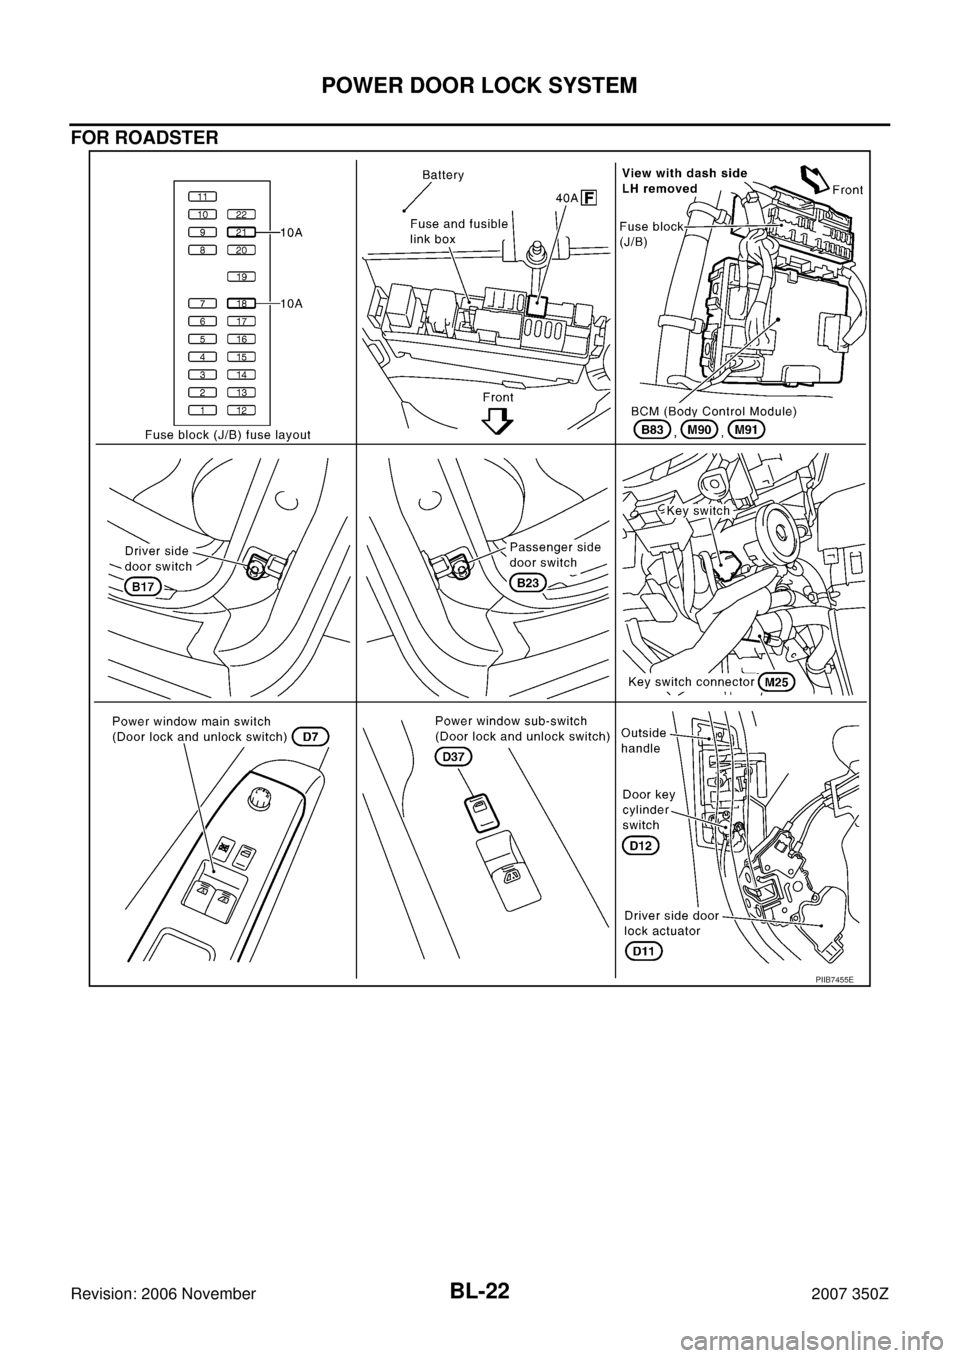 NISSAN 350Z 2007 Z33 Body, Lock And Security System Owners Manual BL-22
POWER DOOR LOCK SYSTEM
Revision: 2006 November2007 350Z
FOR ROADSTER
PIIB7455E 